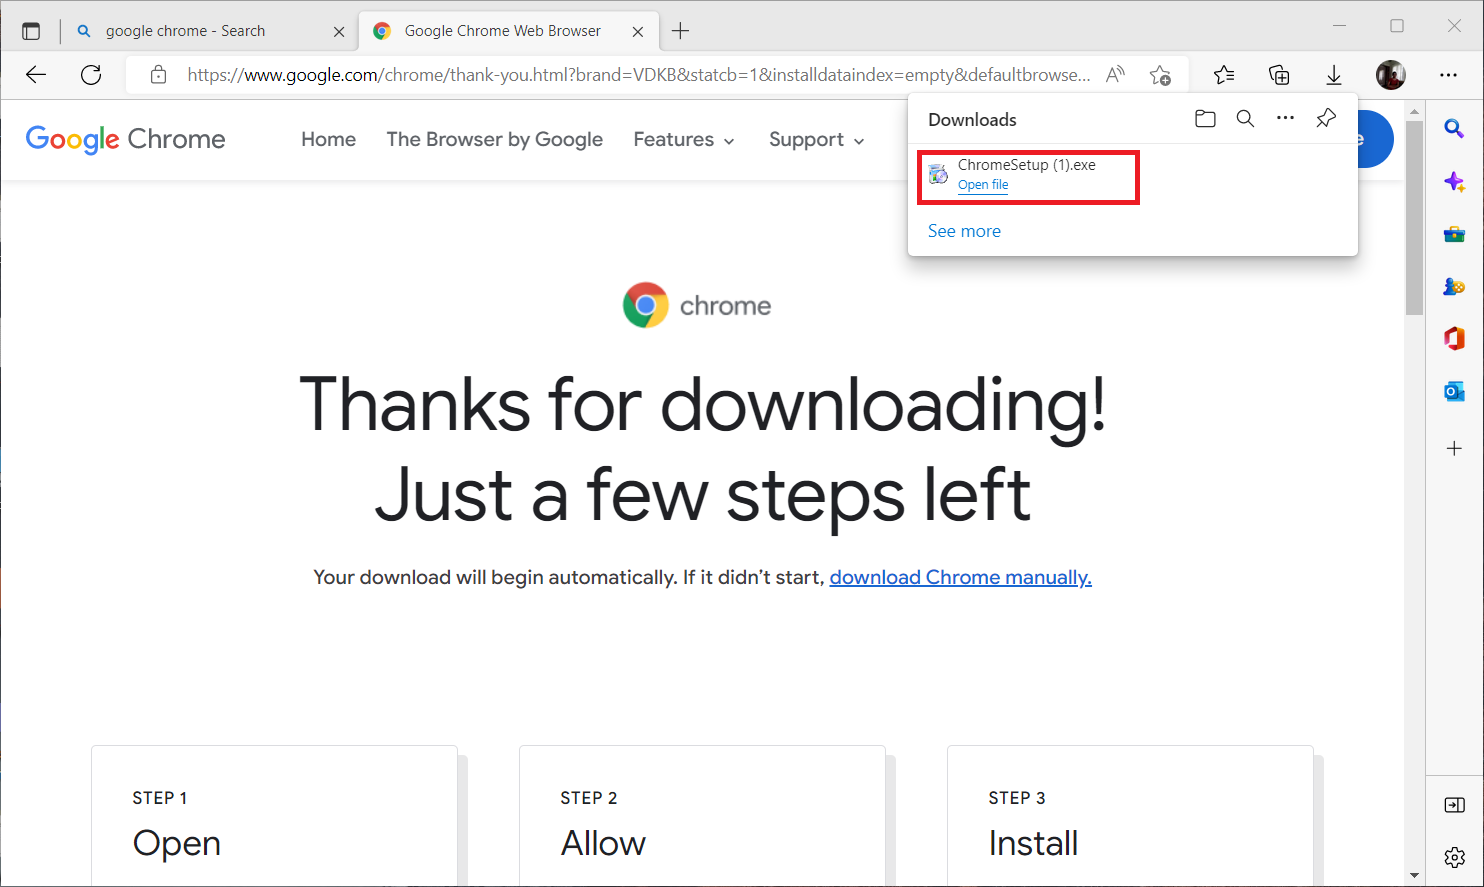 double click the ChromeSetup.exe file to start the downloading process